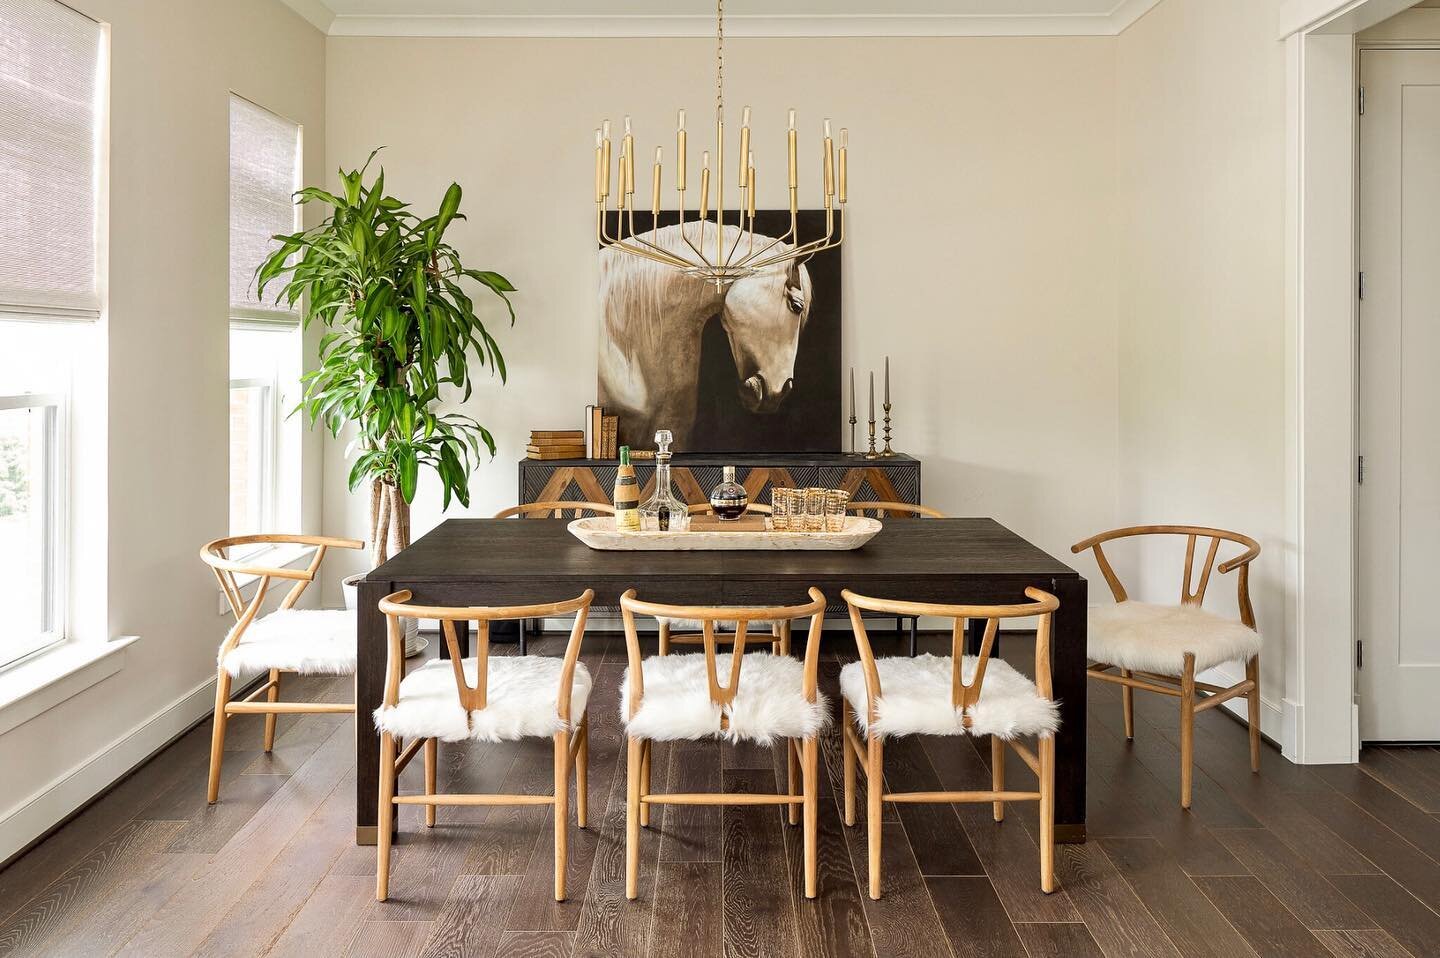 From our Kornblau Terrace project&hellip;who doesn&rsquo;t love a wishbone chair?! 

Photo by: @christykosnicinteriors 
.
.
.
.
.
#interior #homedecor #decor #interiors #homedesign #furniture #decoration #interiordecor #interiorstyling #interior4all 